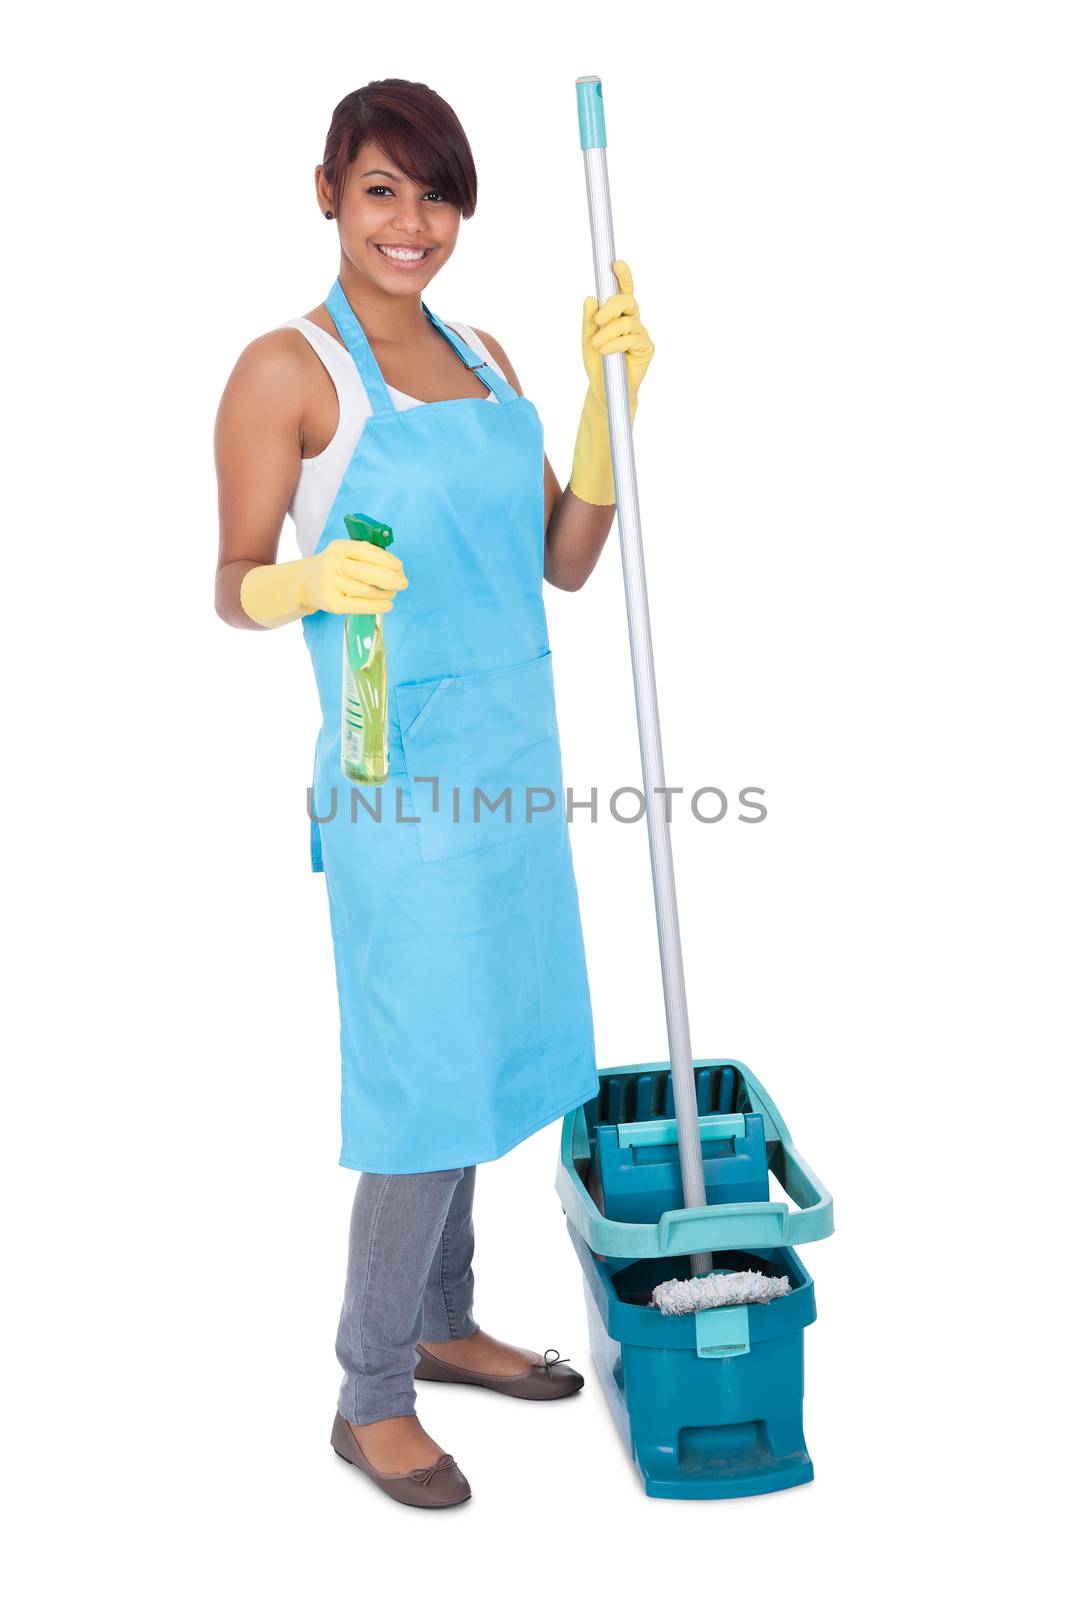 Cheerful woman having fun while cleaning by AndreyPopov